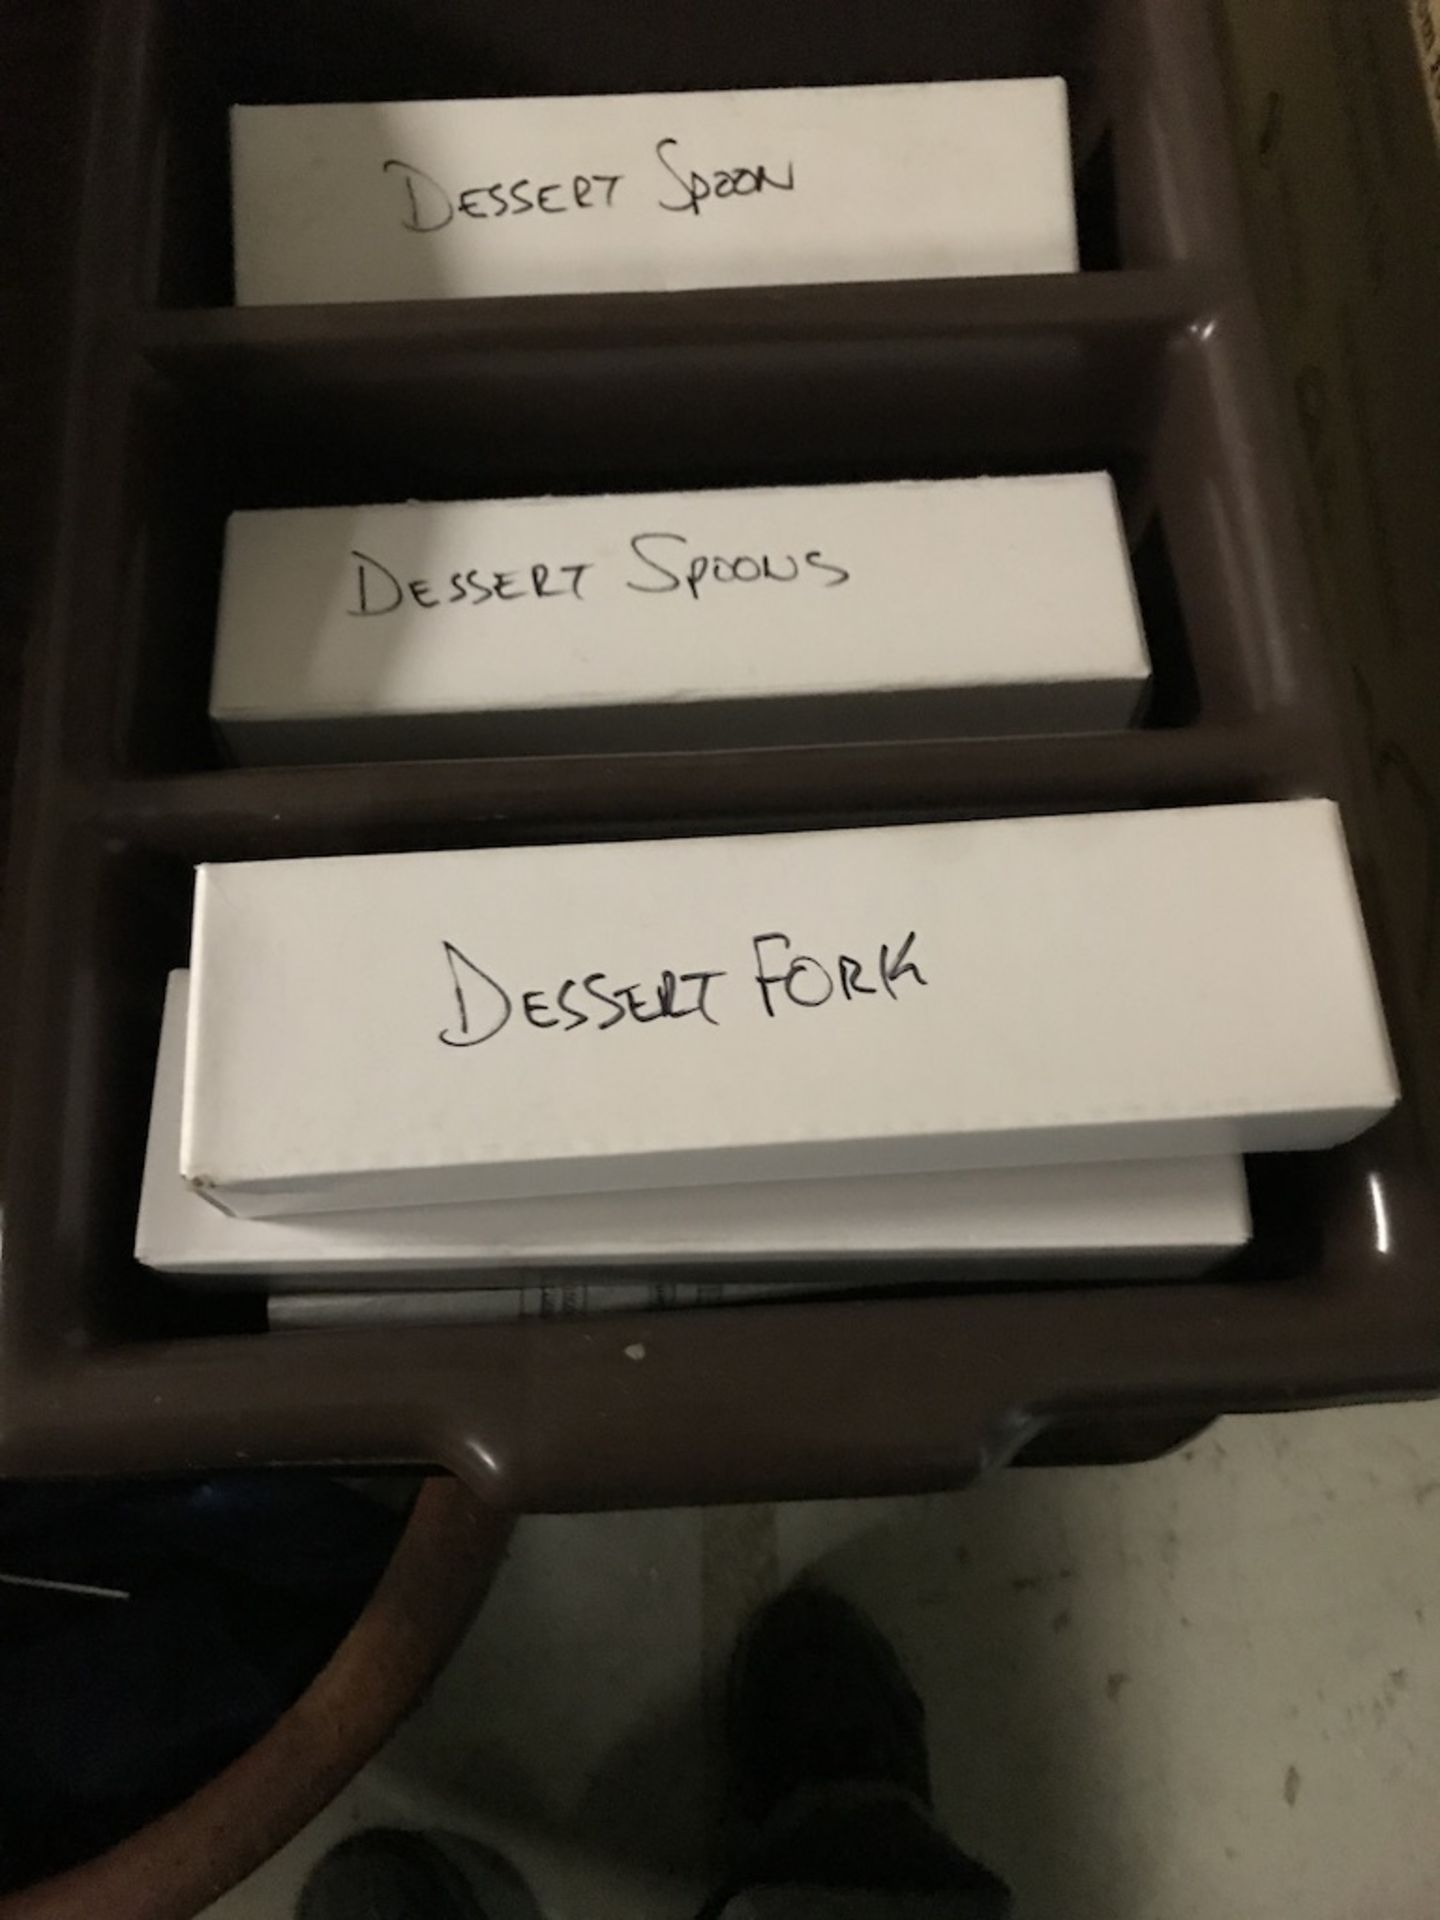 LOT OF: (4)SMALL BOXES OF DESSERT SPOONS AND (3) SMALL BOXES OF DESSERT FORKS - Image 3 of 5